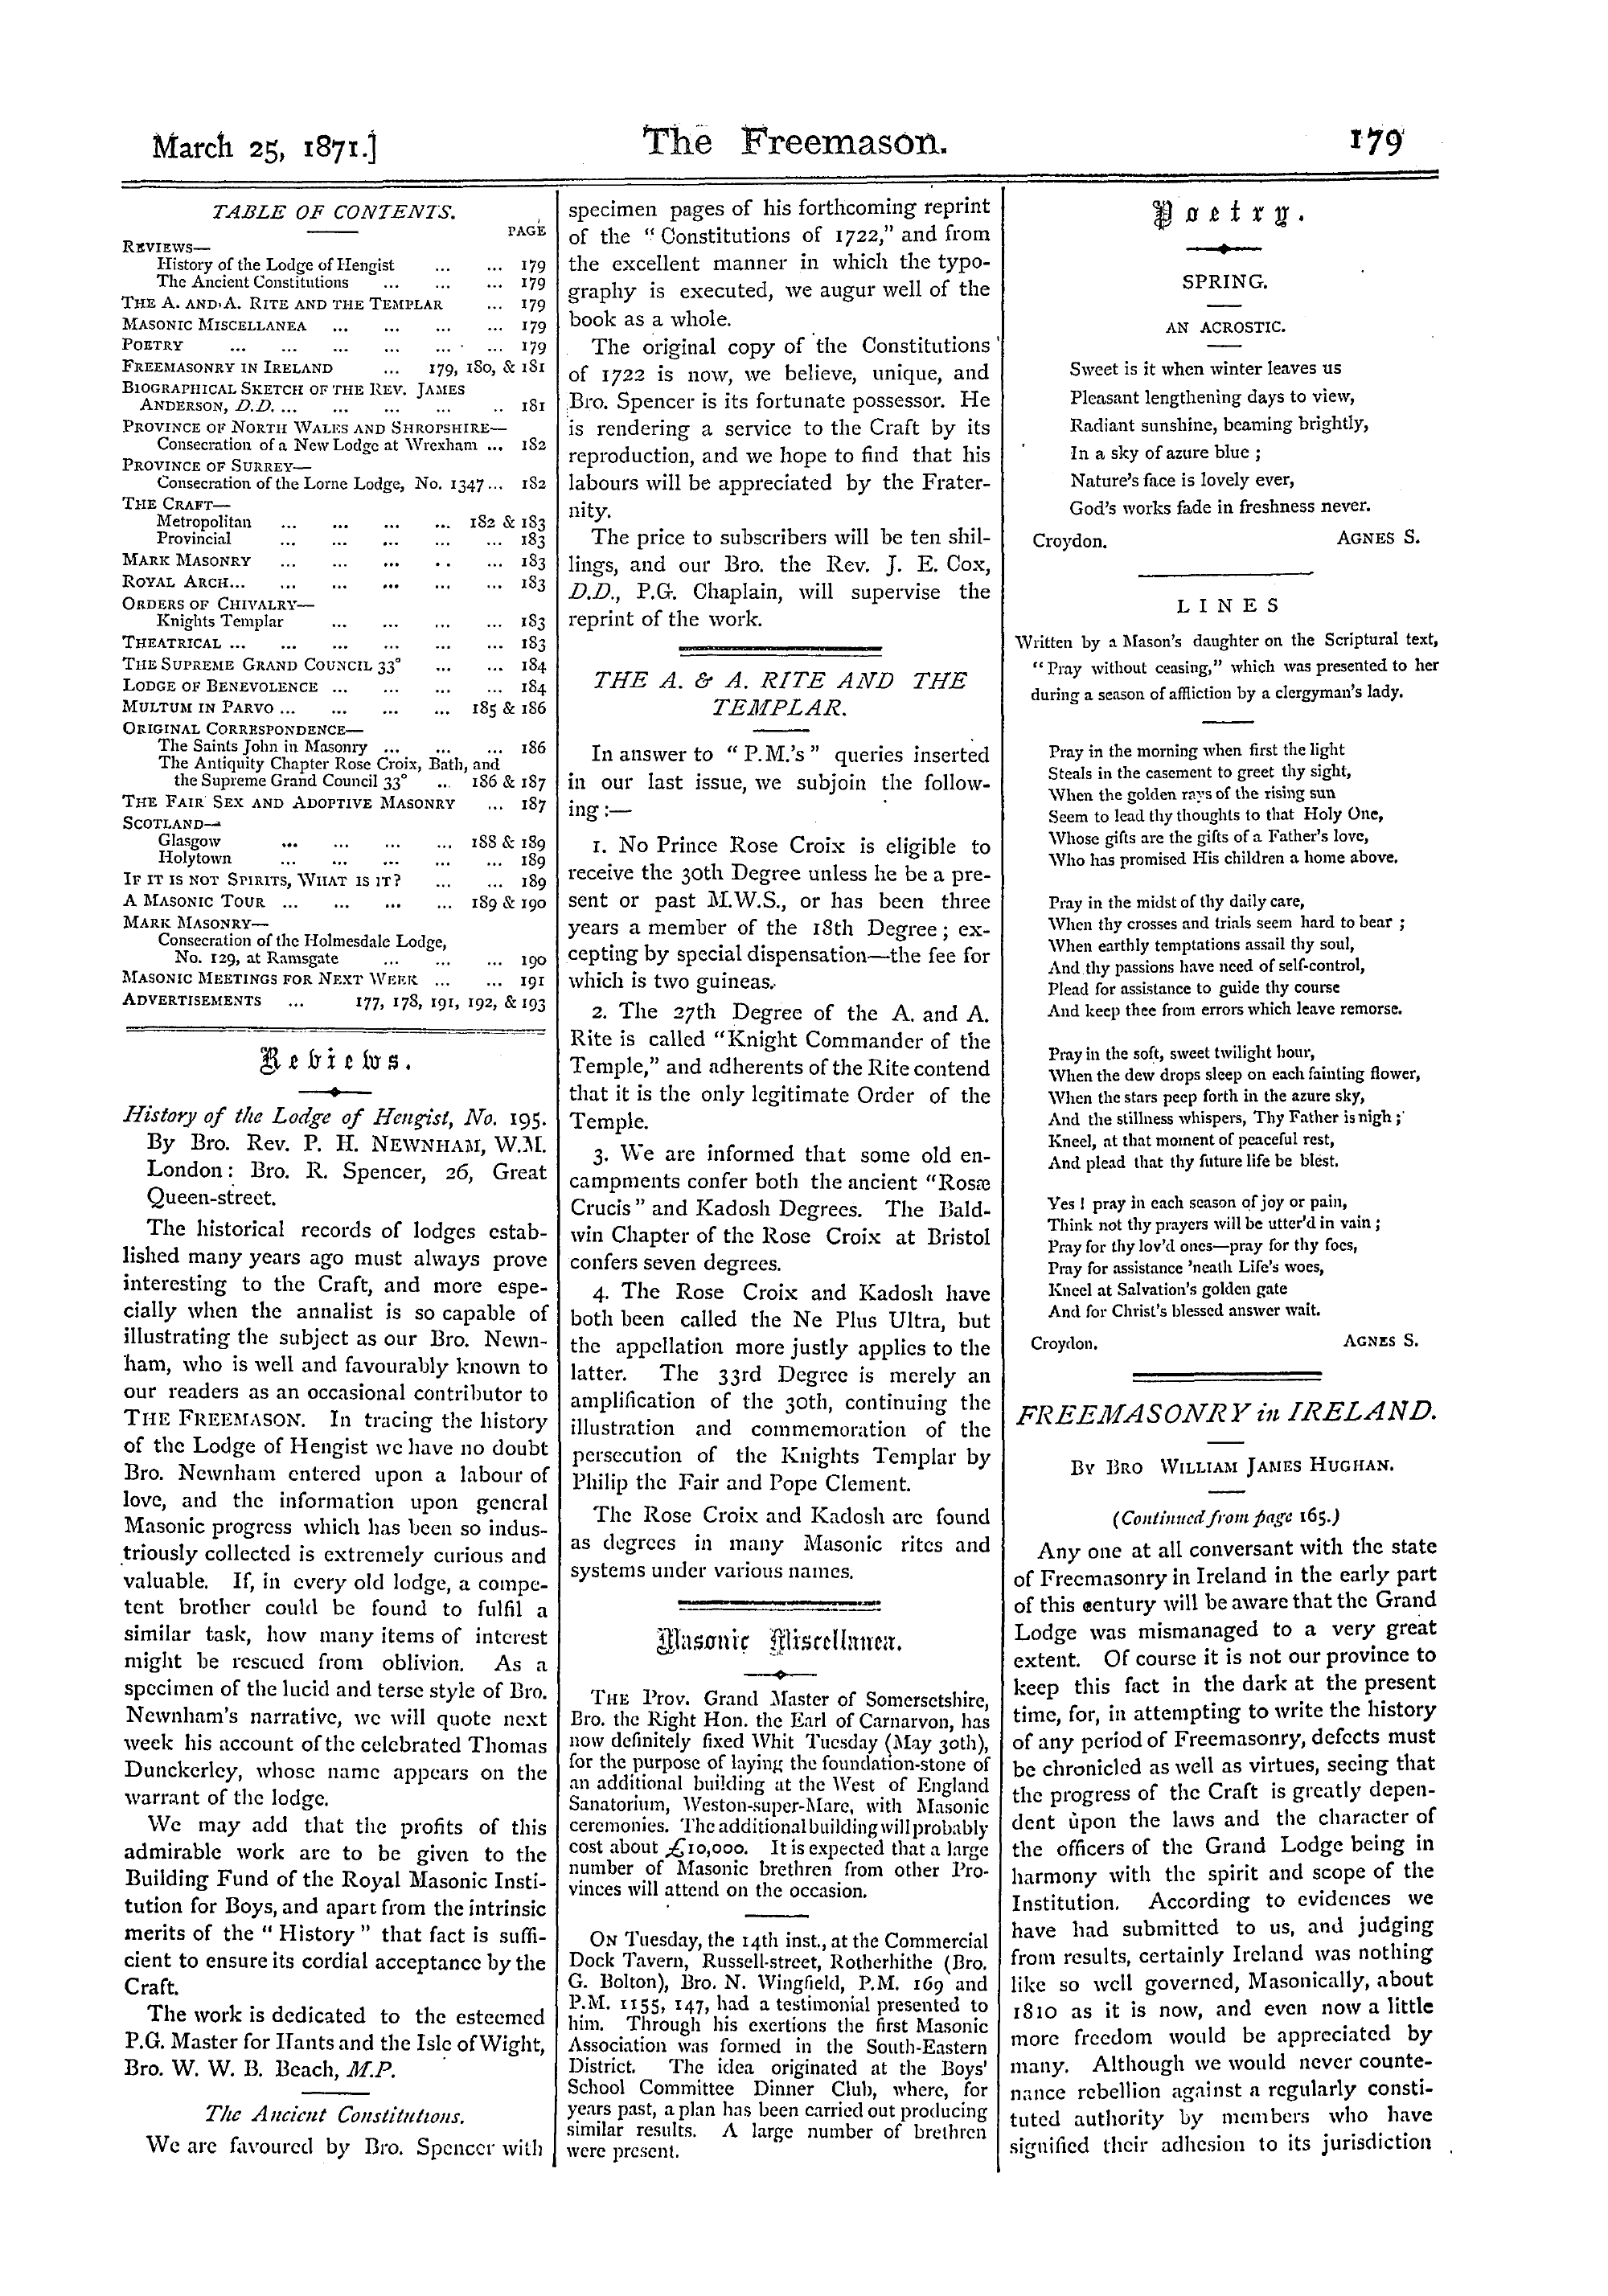 The Freemason: 1871-03-25 - Table Of Contents.